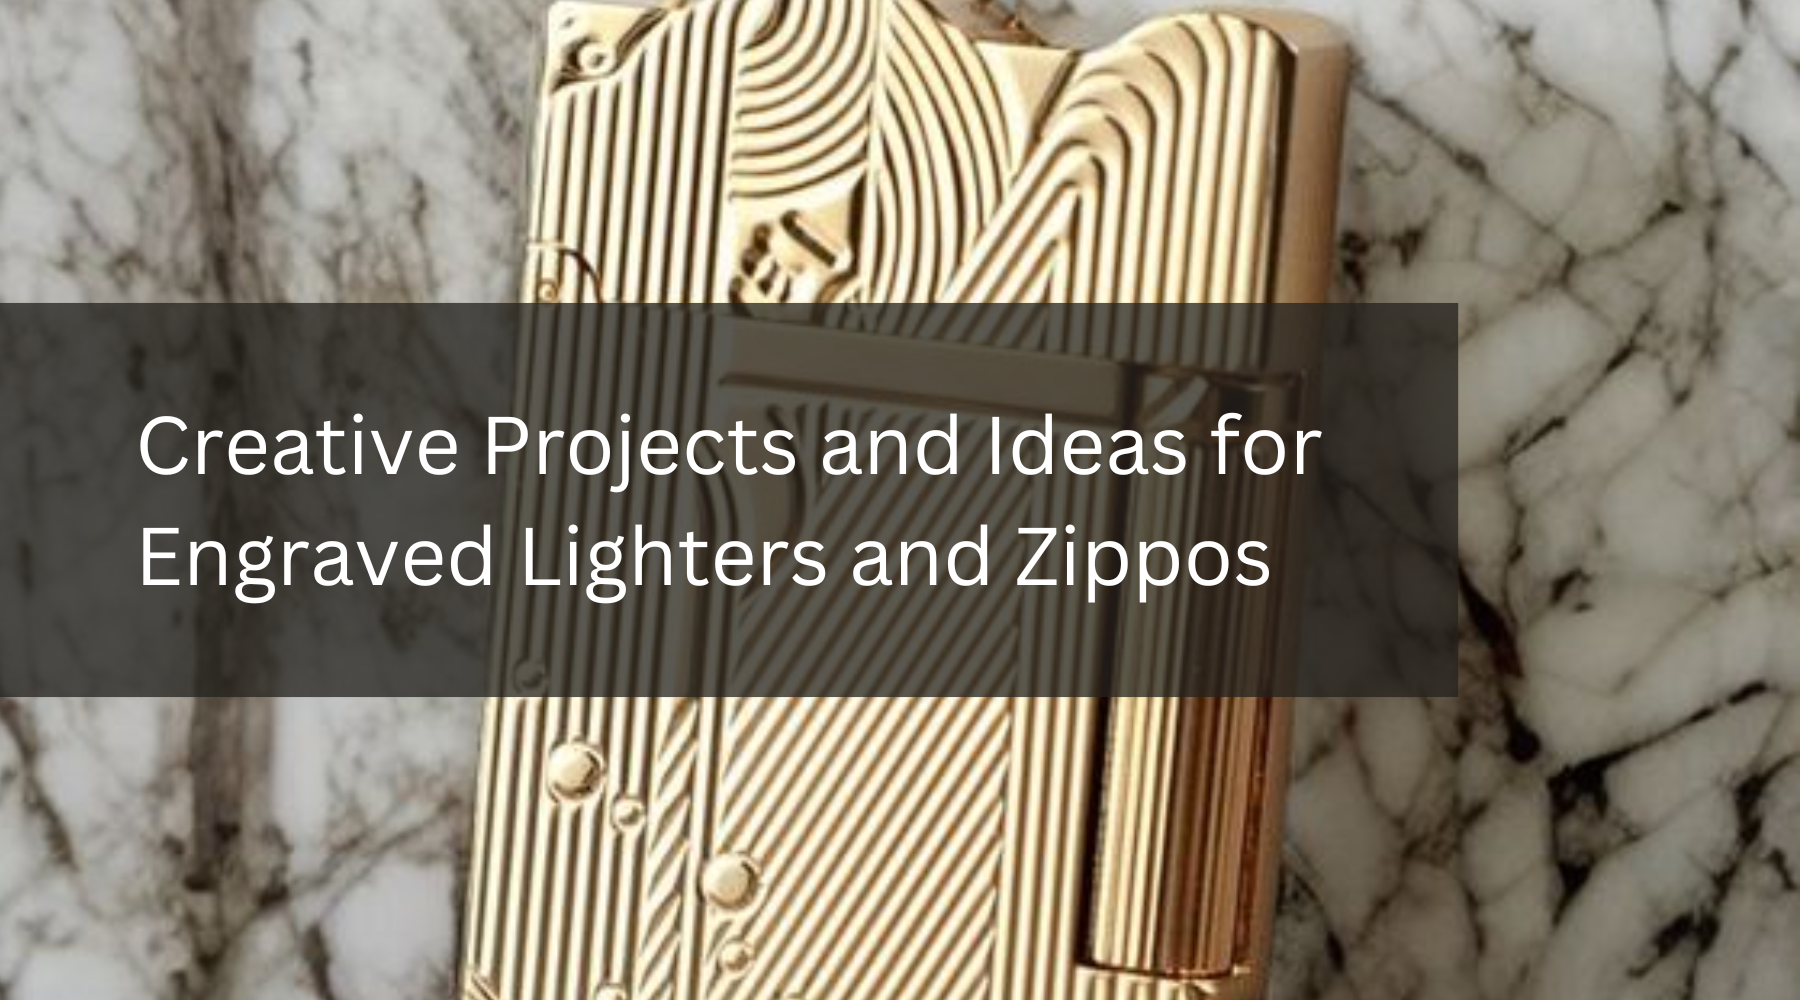 Creative Projects and Ideas for Engraved Lighters and Zippos